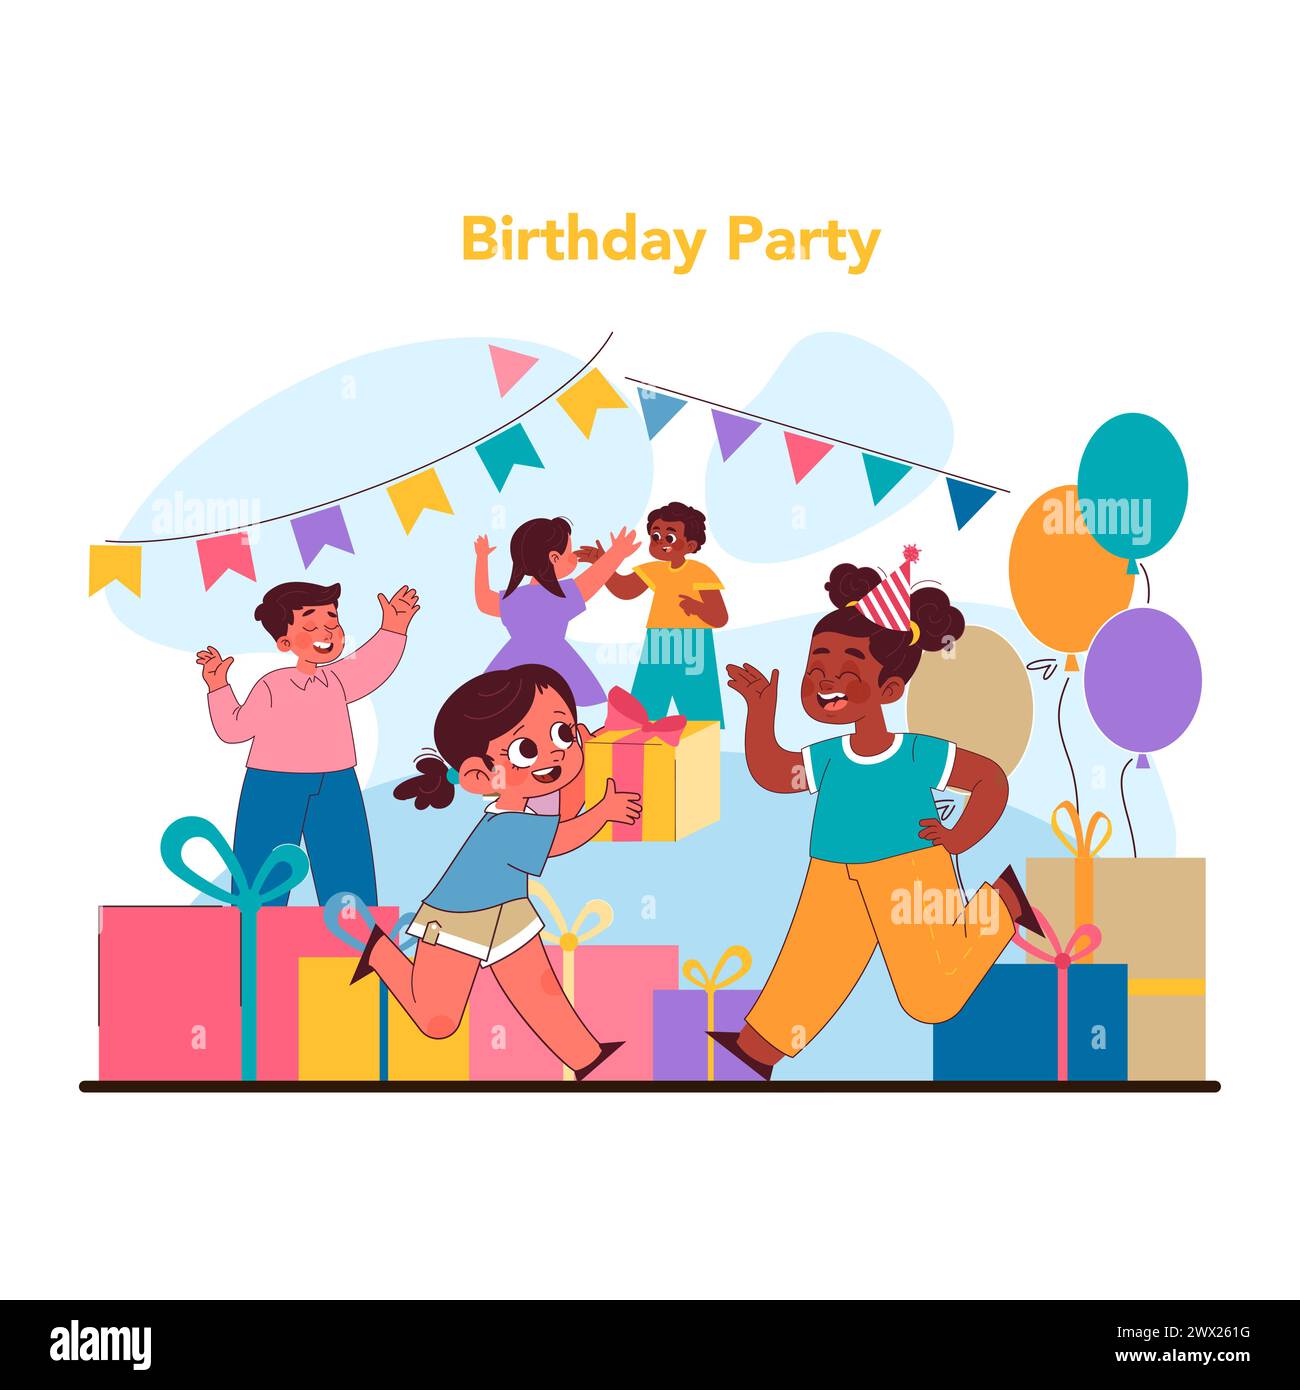 Child birthday concept. Gleeful kids at festive birthday bash, exchanging gifts and basking in joy of togetherness and celebration. Bright banners and balloons adorn moment. Flat vector illustration Stock Vector